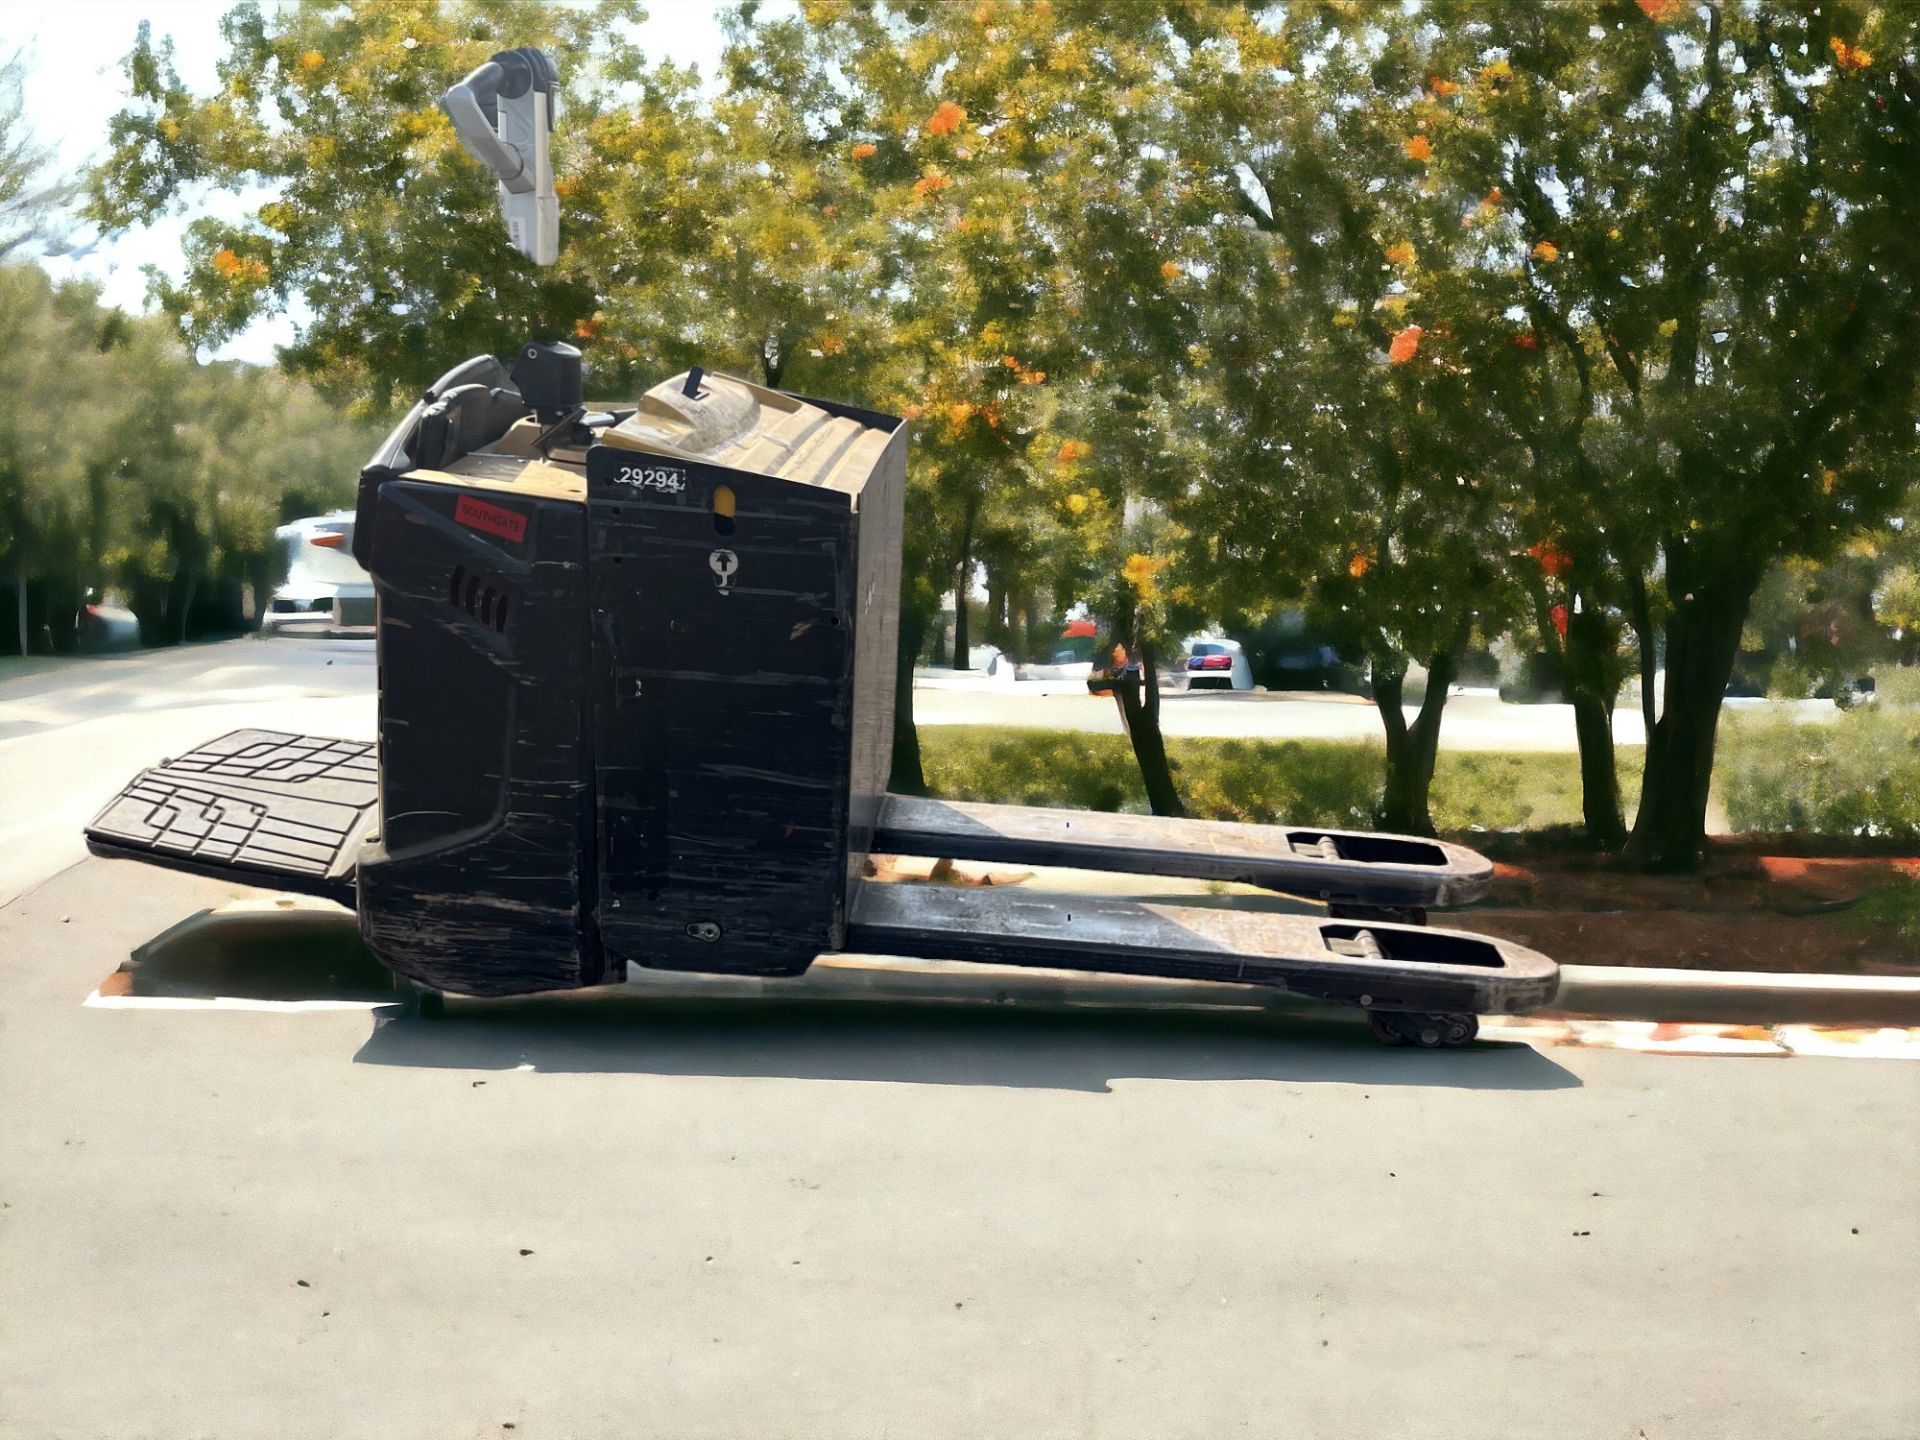 CAT LIFT TRUCKS ELECTRIC PALLET TRUCK - MODEL NPV20N2 (2016) **(INCLUDES CHARGER)** - Image 3 of 3